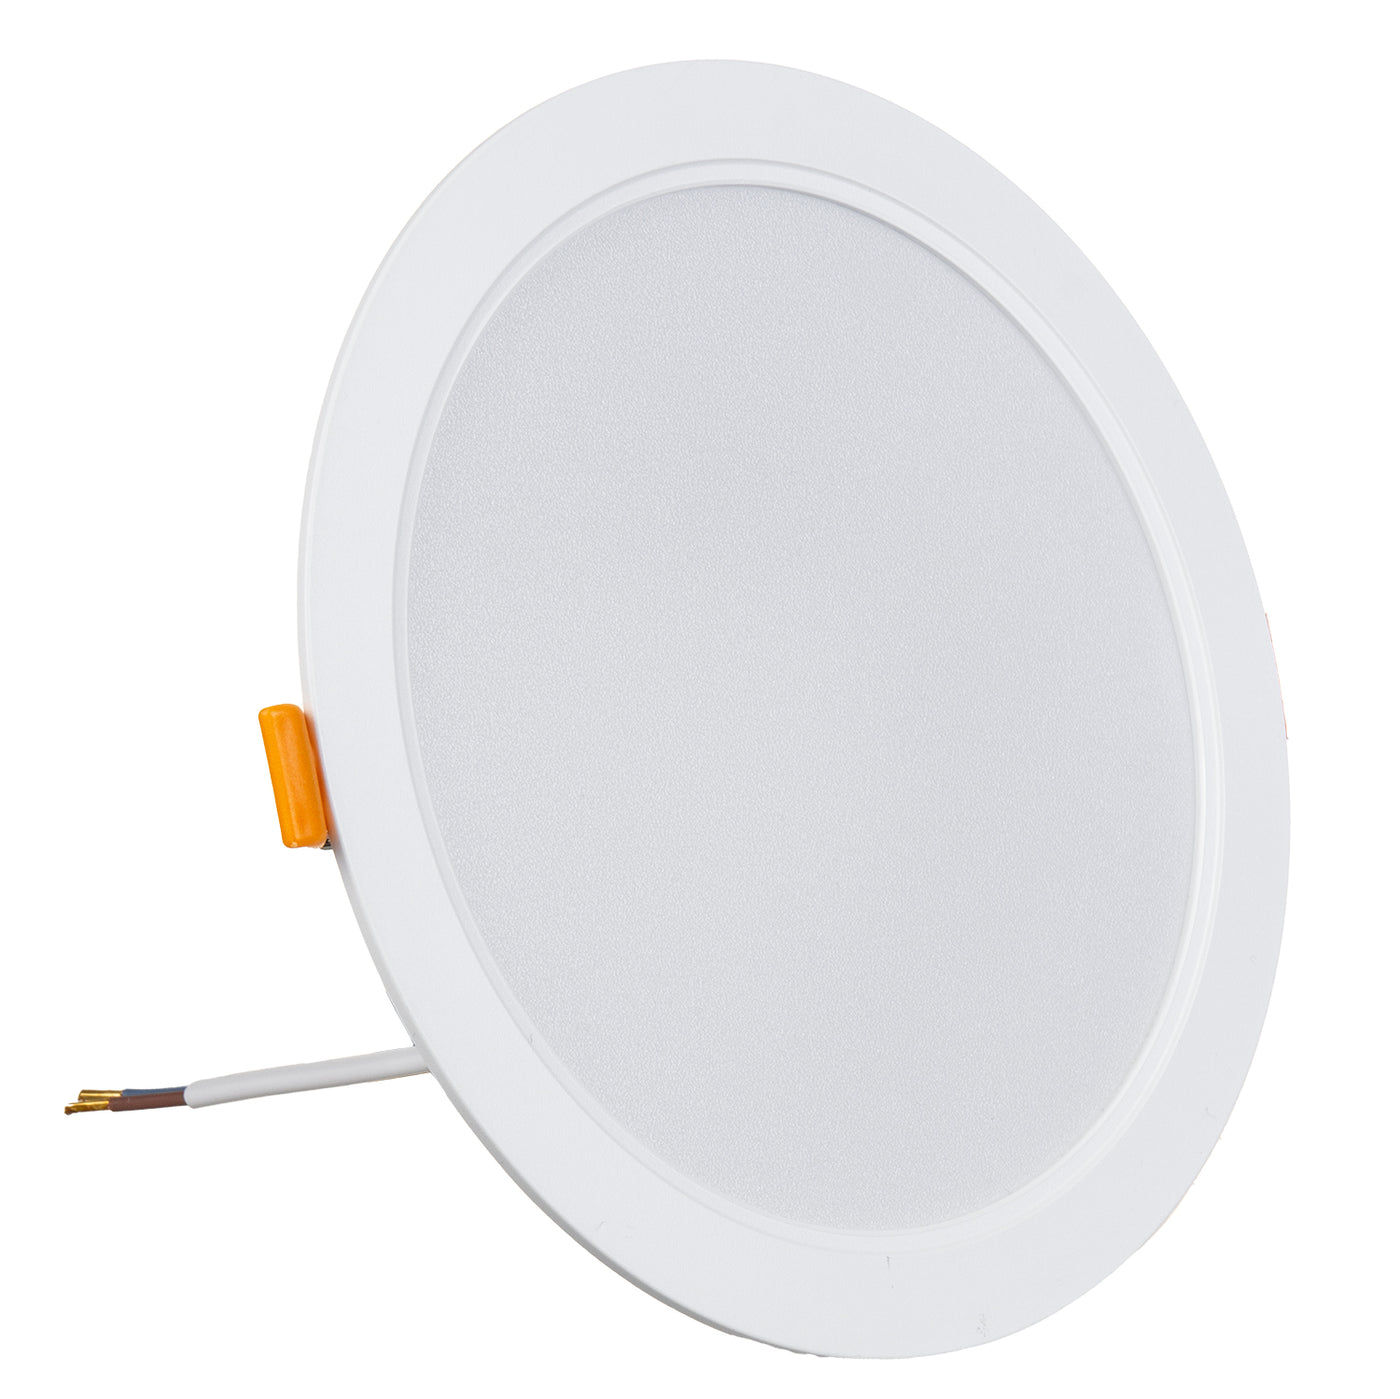 Panel LED sufitowy Maclean, podtynkowy SLIM, 18W, Neutral White 4000K, 170*26mm, 1800 lm, MCE372 R + adapter natynkowy MCE377 R